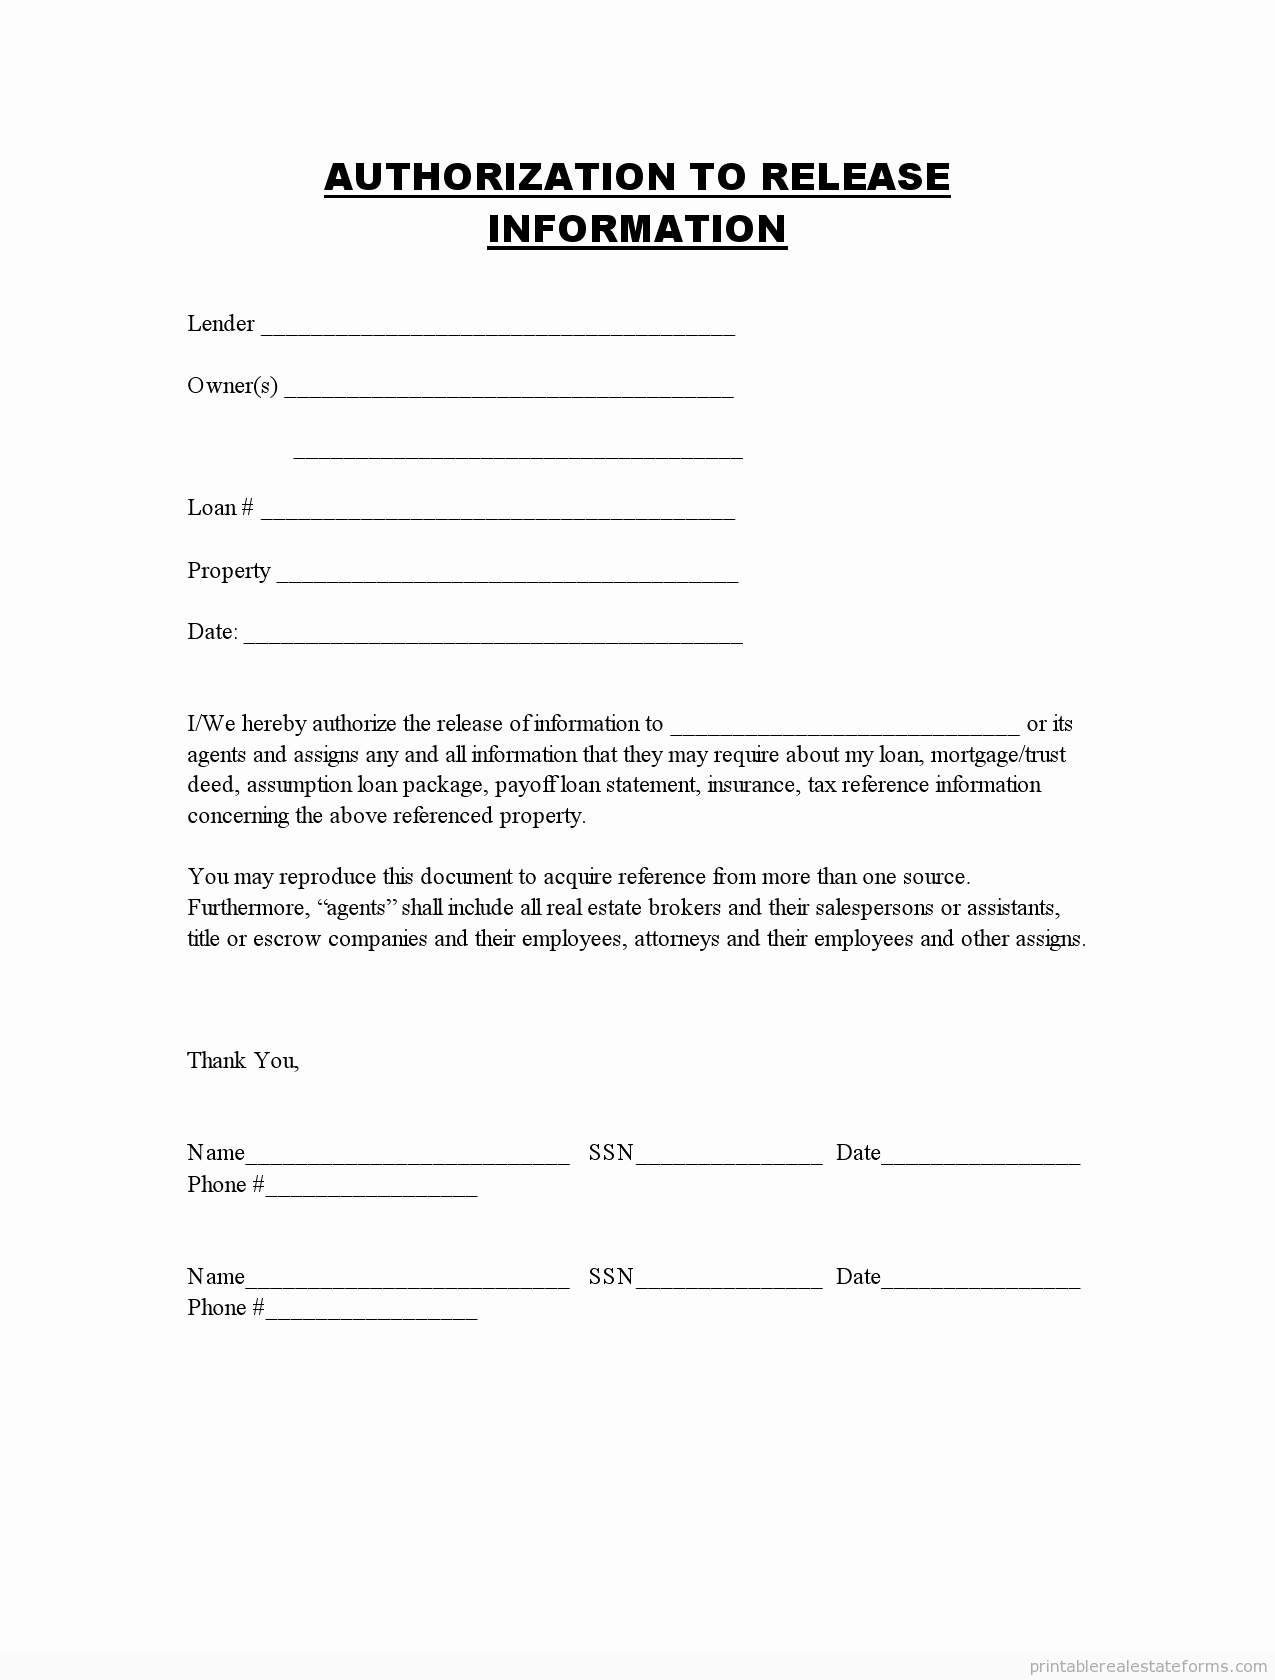 3rd Party Authorization form Template Best Of Release Information forms Printable Blank Template